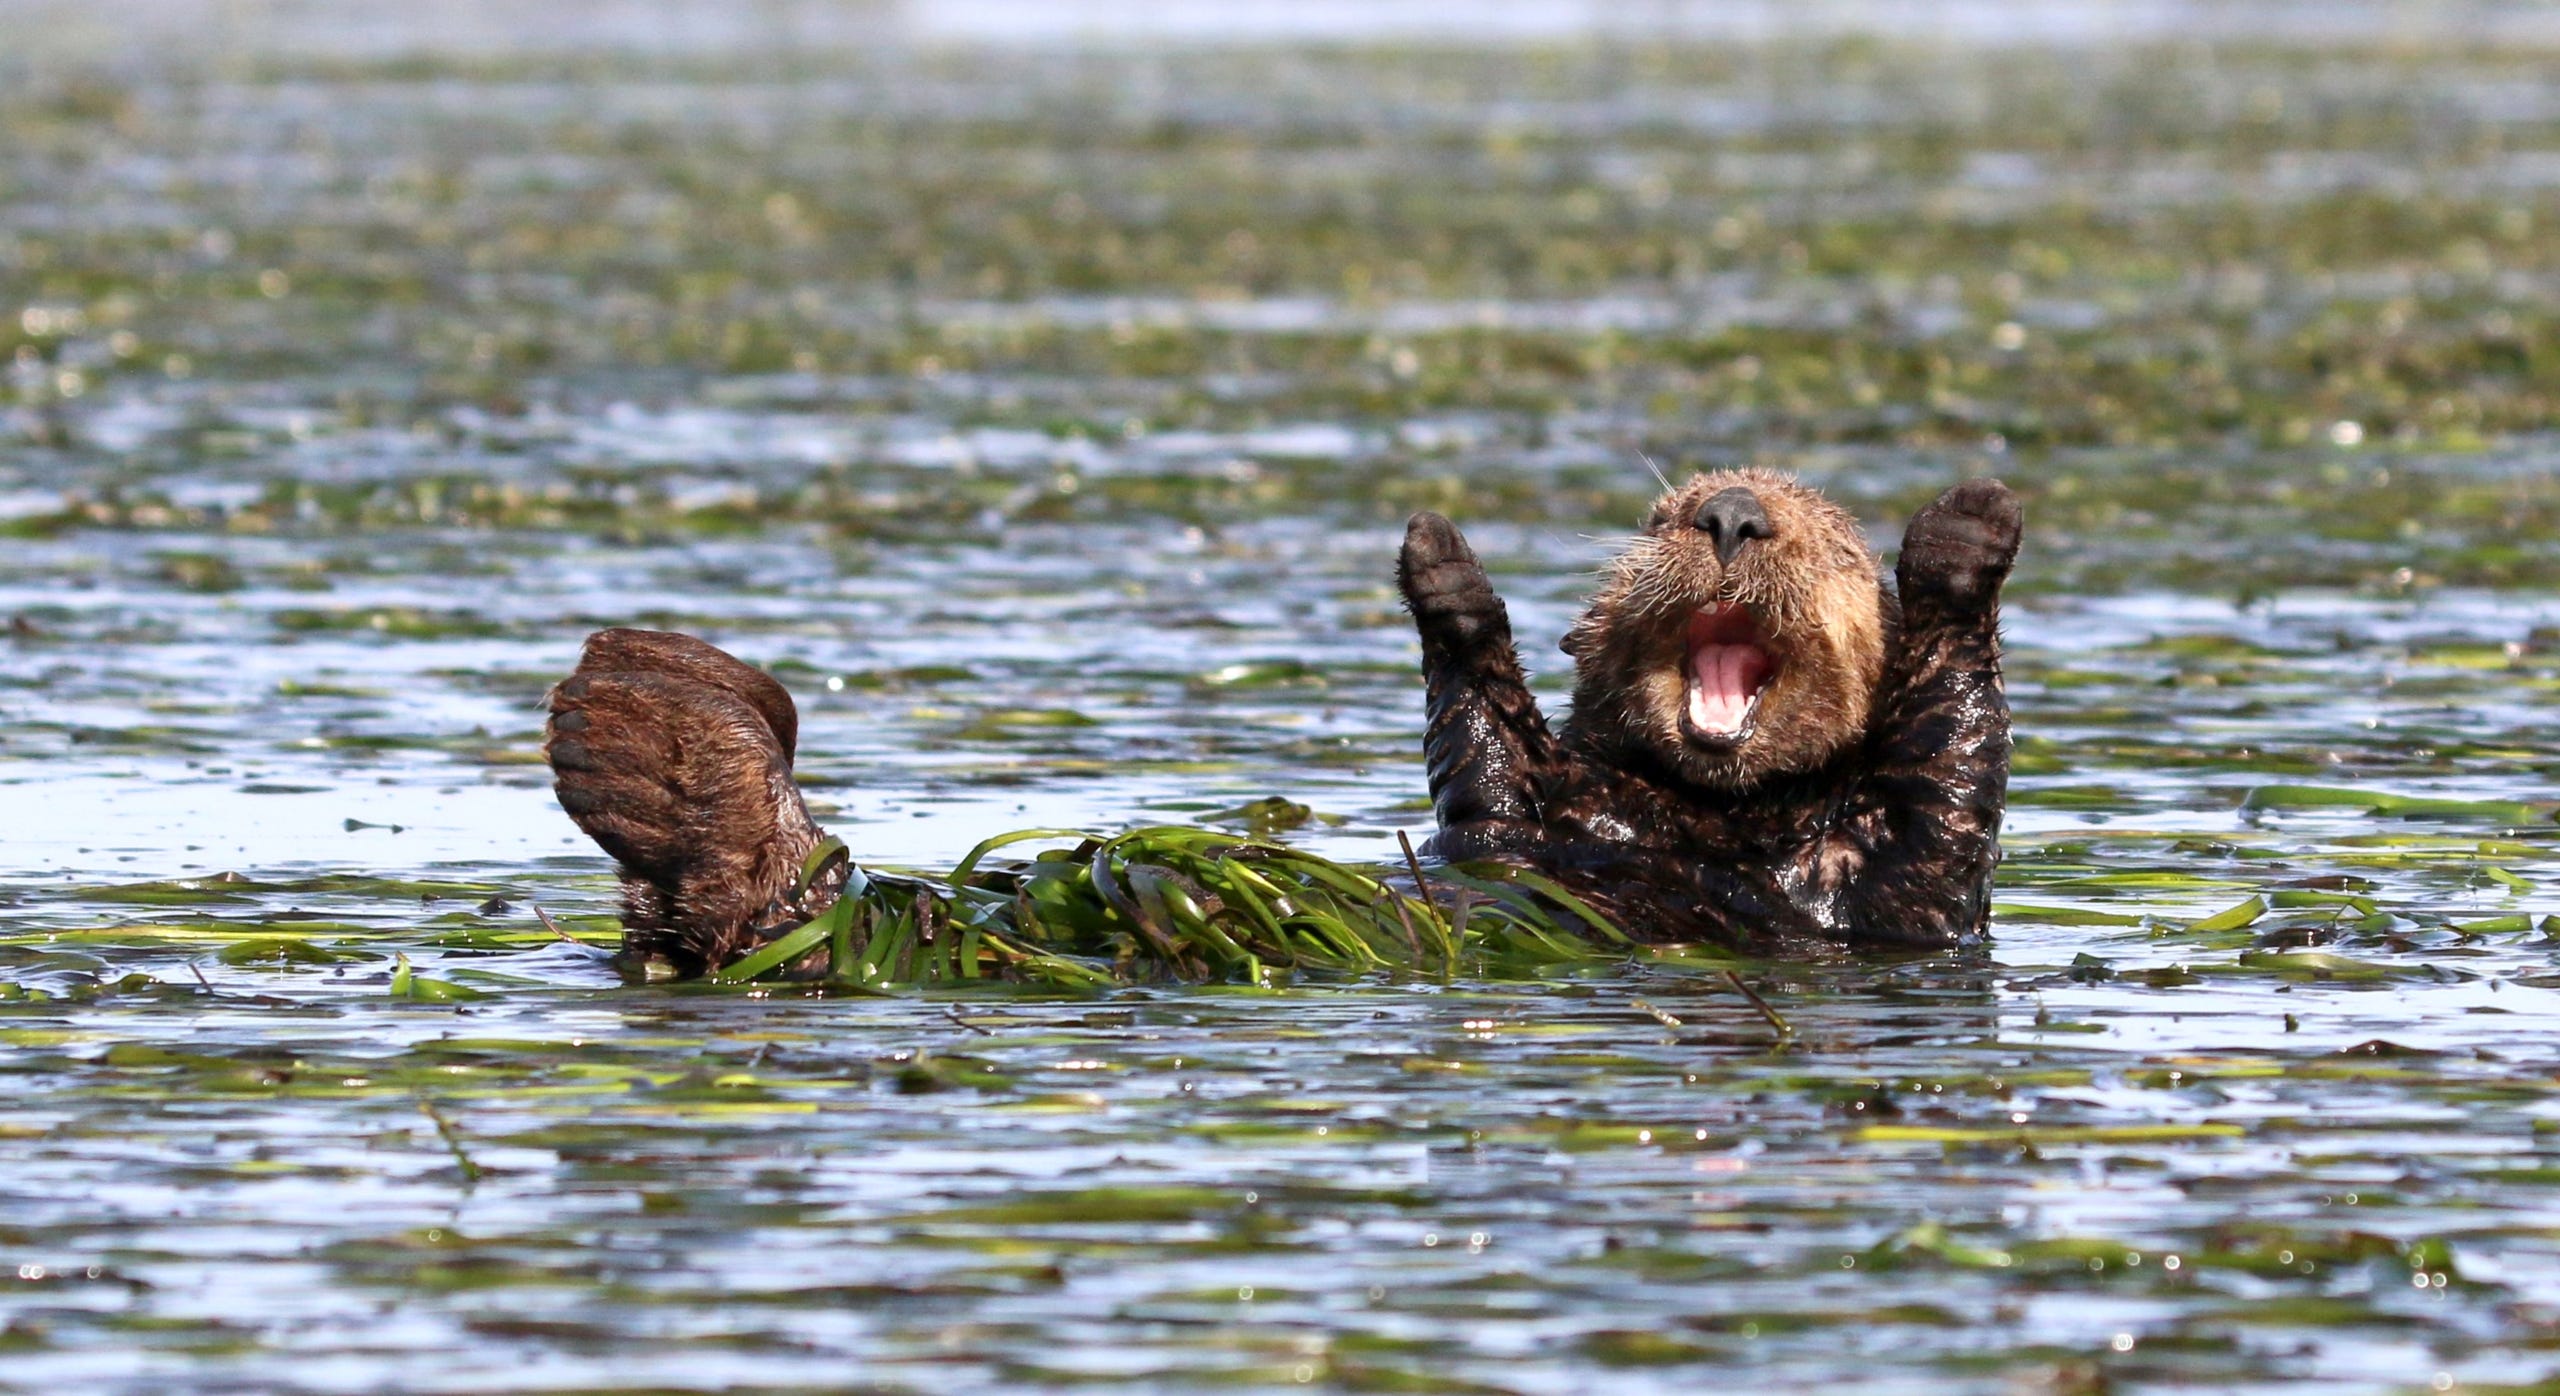 An early morning stretch from a sleepy sea otter in the Elkhorn Slough, Calif.